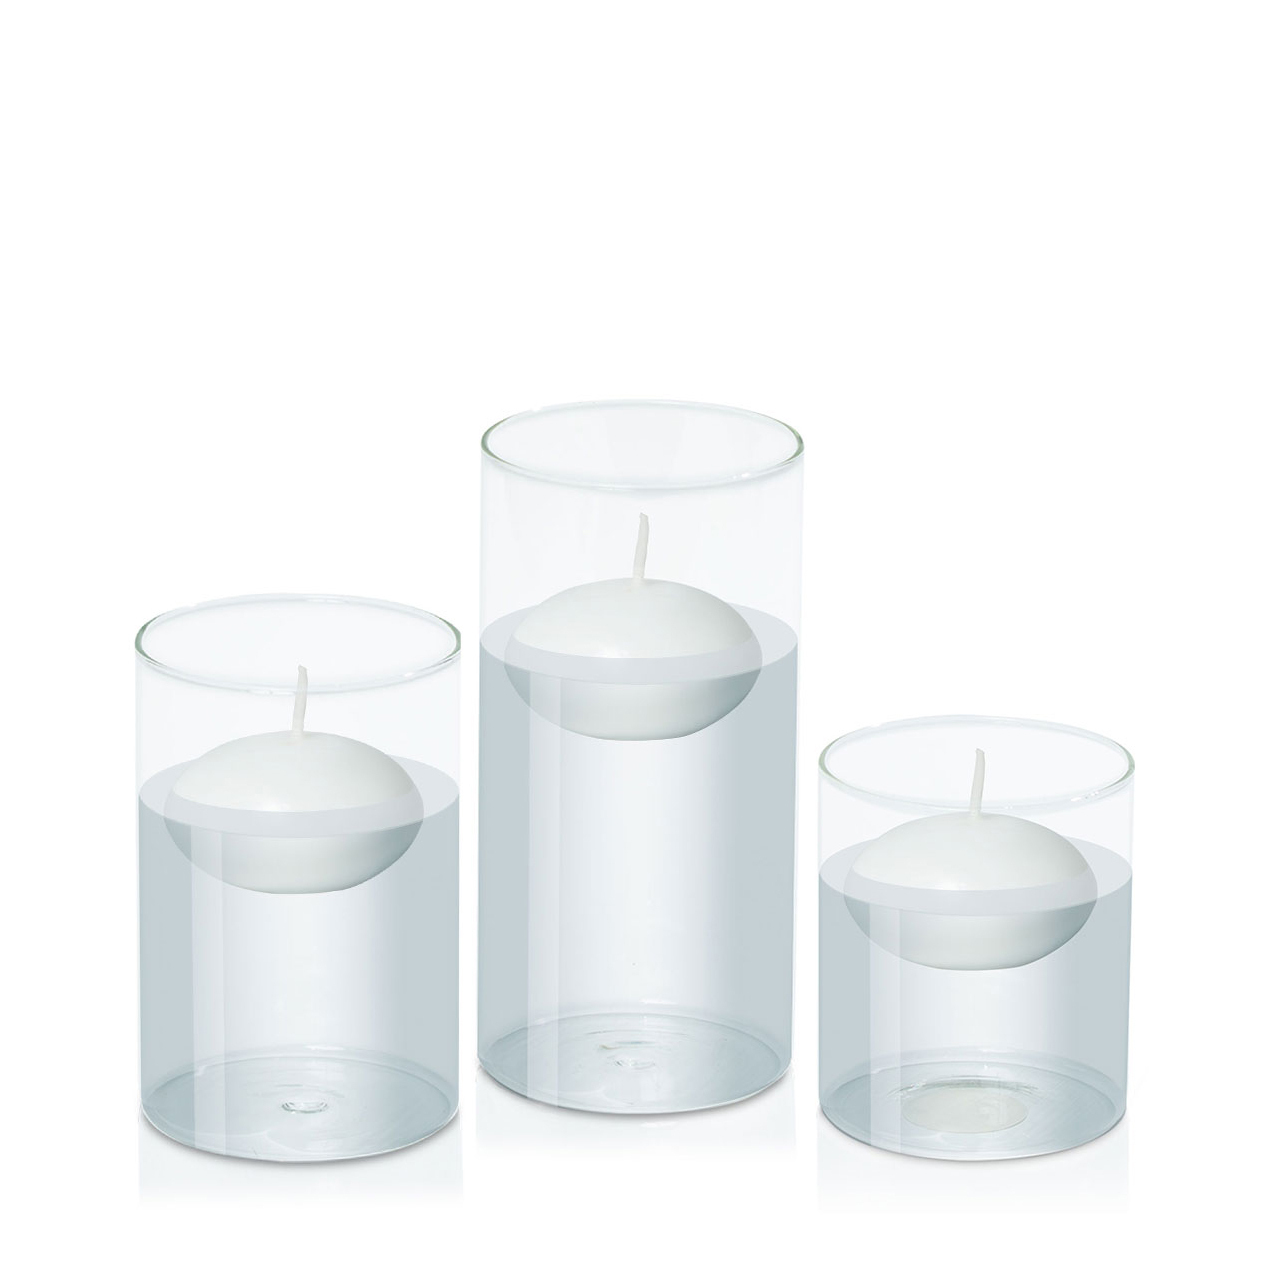 8cm Floating Candle in 10cm Glass Set - Sm